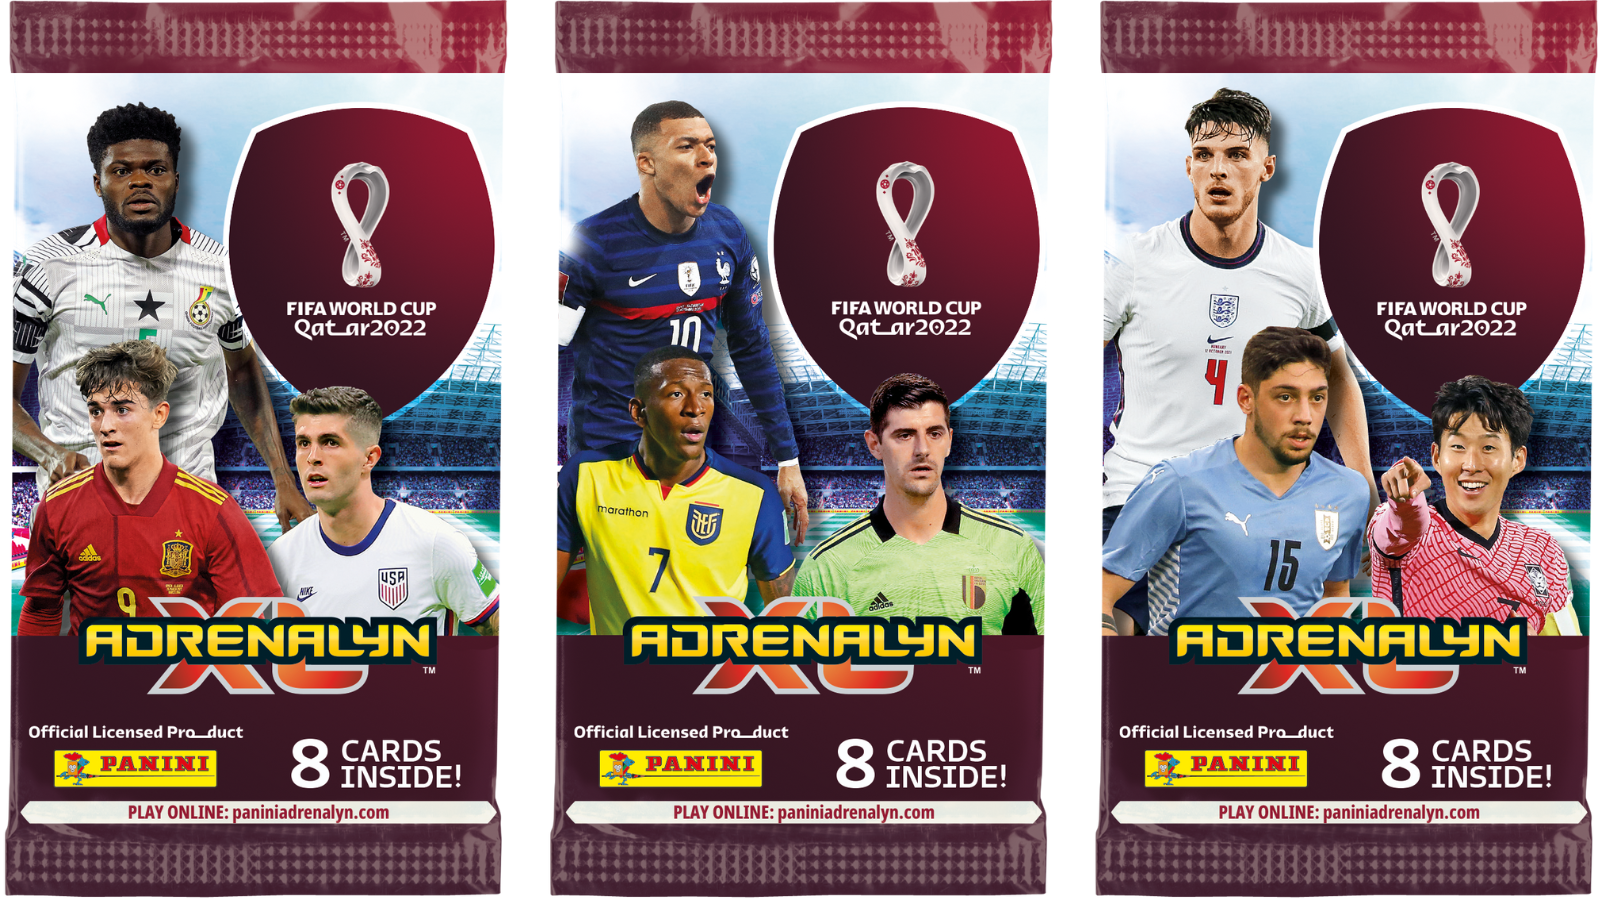 How to Play Panini Adrenalyn XL Card Game – SoccerCards.ca